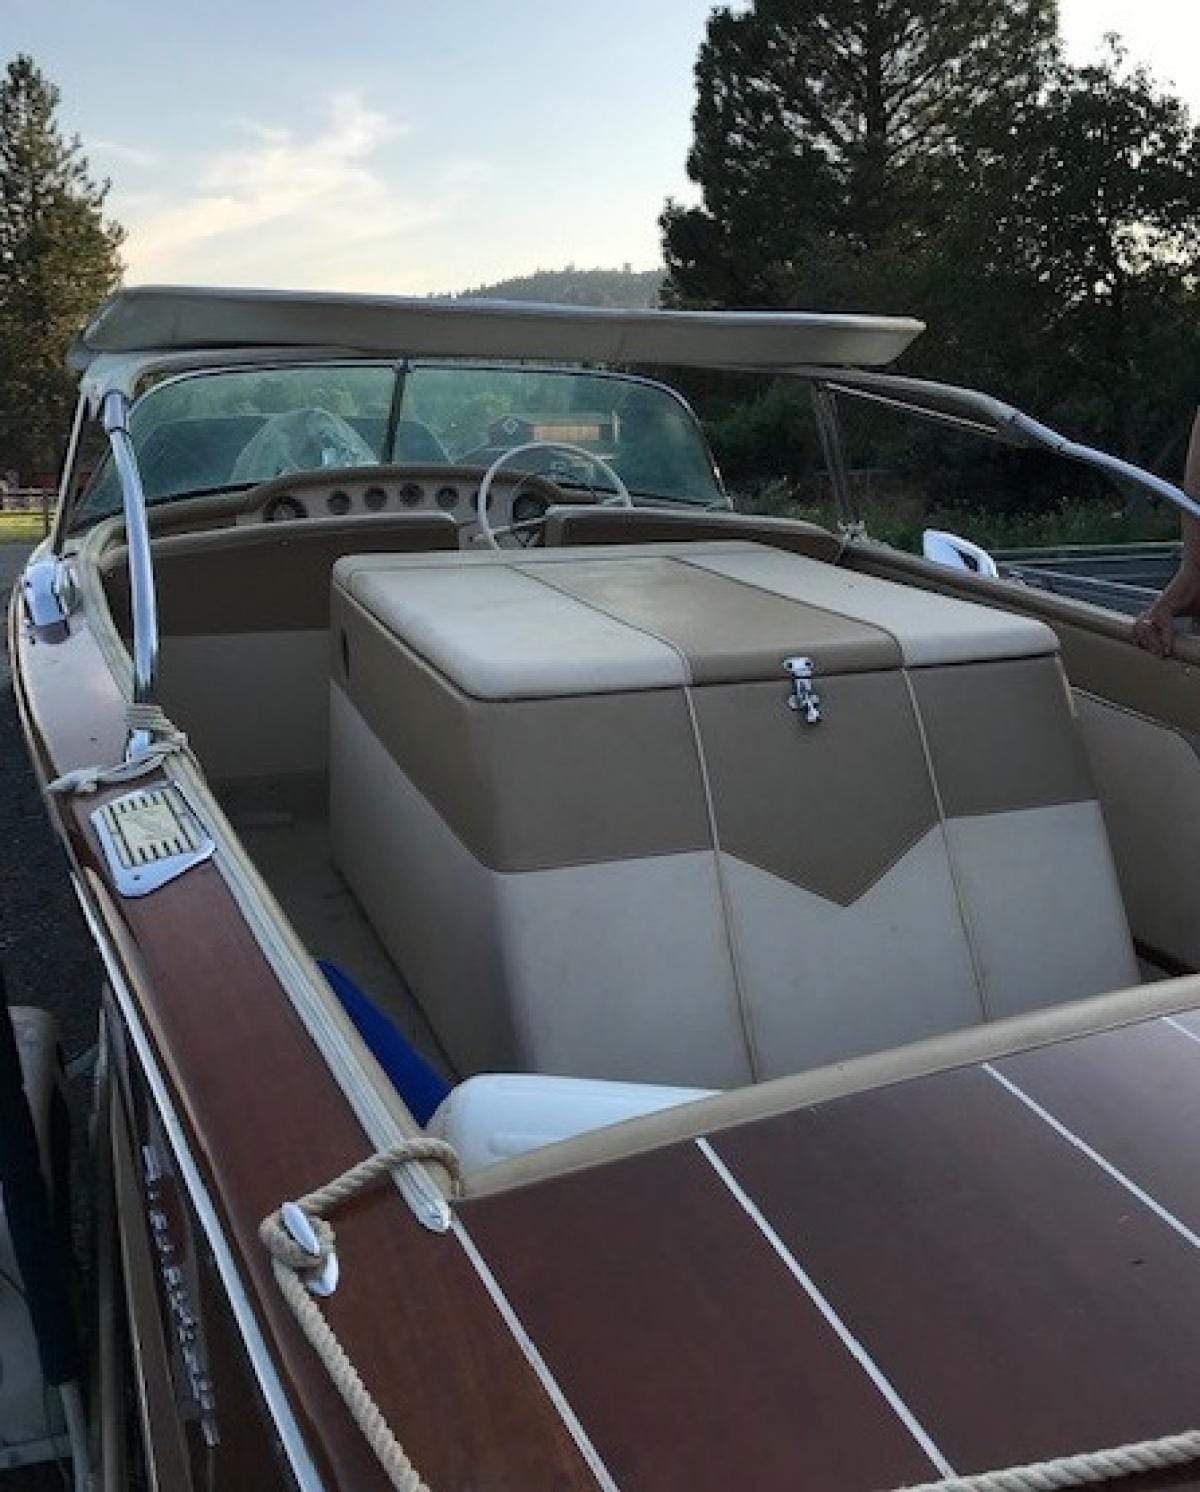 Classic Wooden Boat for Sale -  1957 CENTURY 18' RESORTER